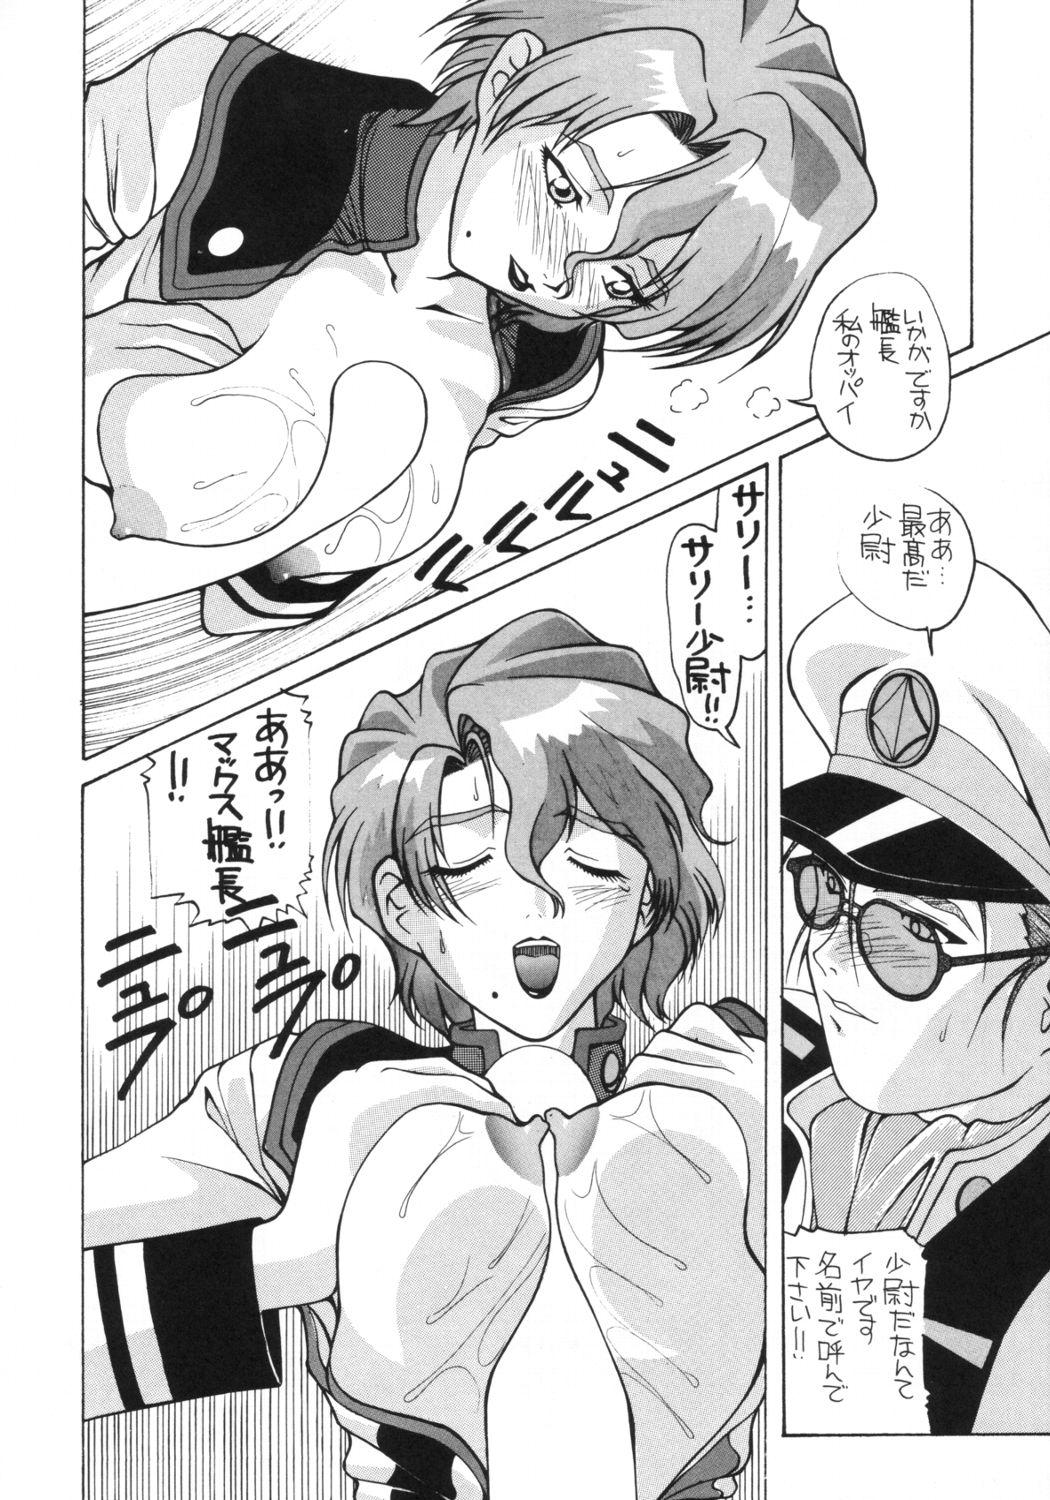 Mature Aido 56789 Soushuuhen - Macross 7 Lord of lords ryu knight Brave express might gaine Dirty pair flash Mama is a 4th grader Hardfuck - Page 12